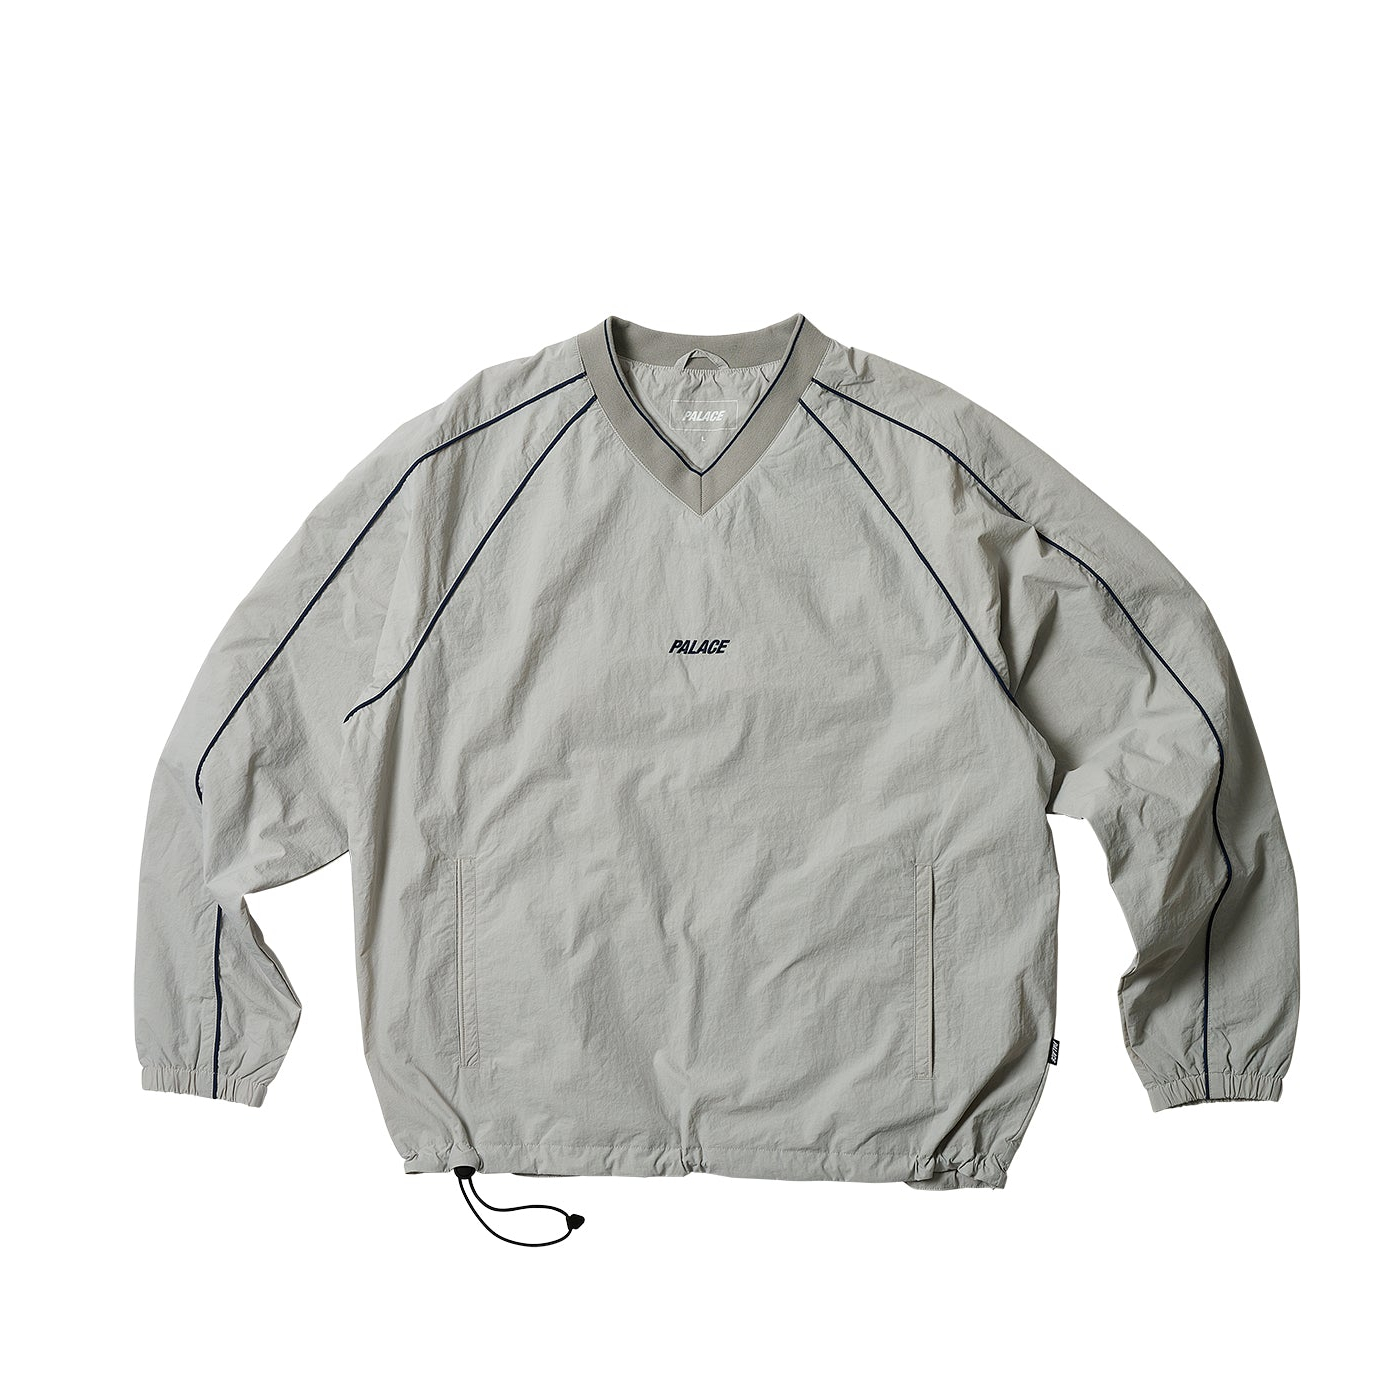 Thumbnail PIPED SHELL PULLOVER GREY one color